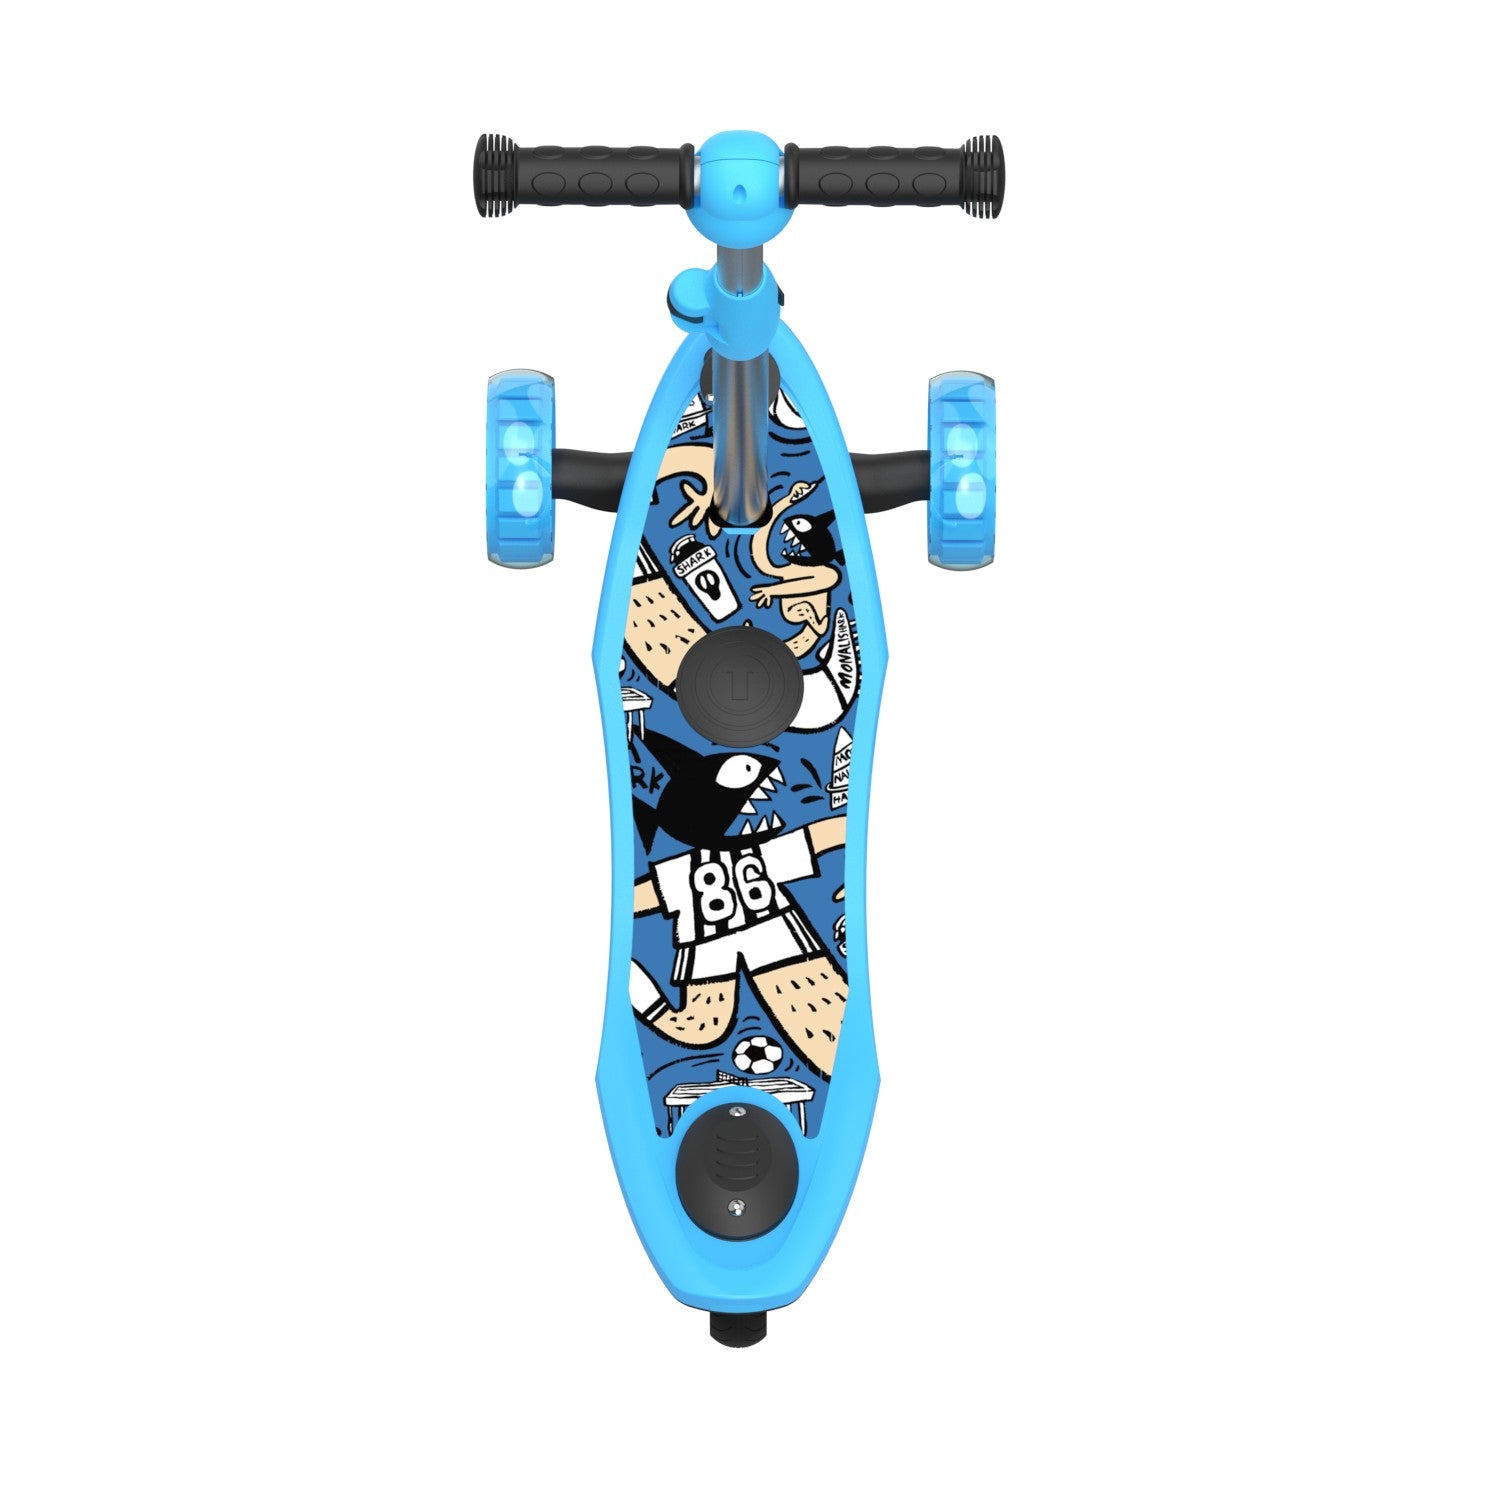 iSinwheel® 2in1 Electric Scooter for Kids Ages 3-12 pedals